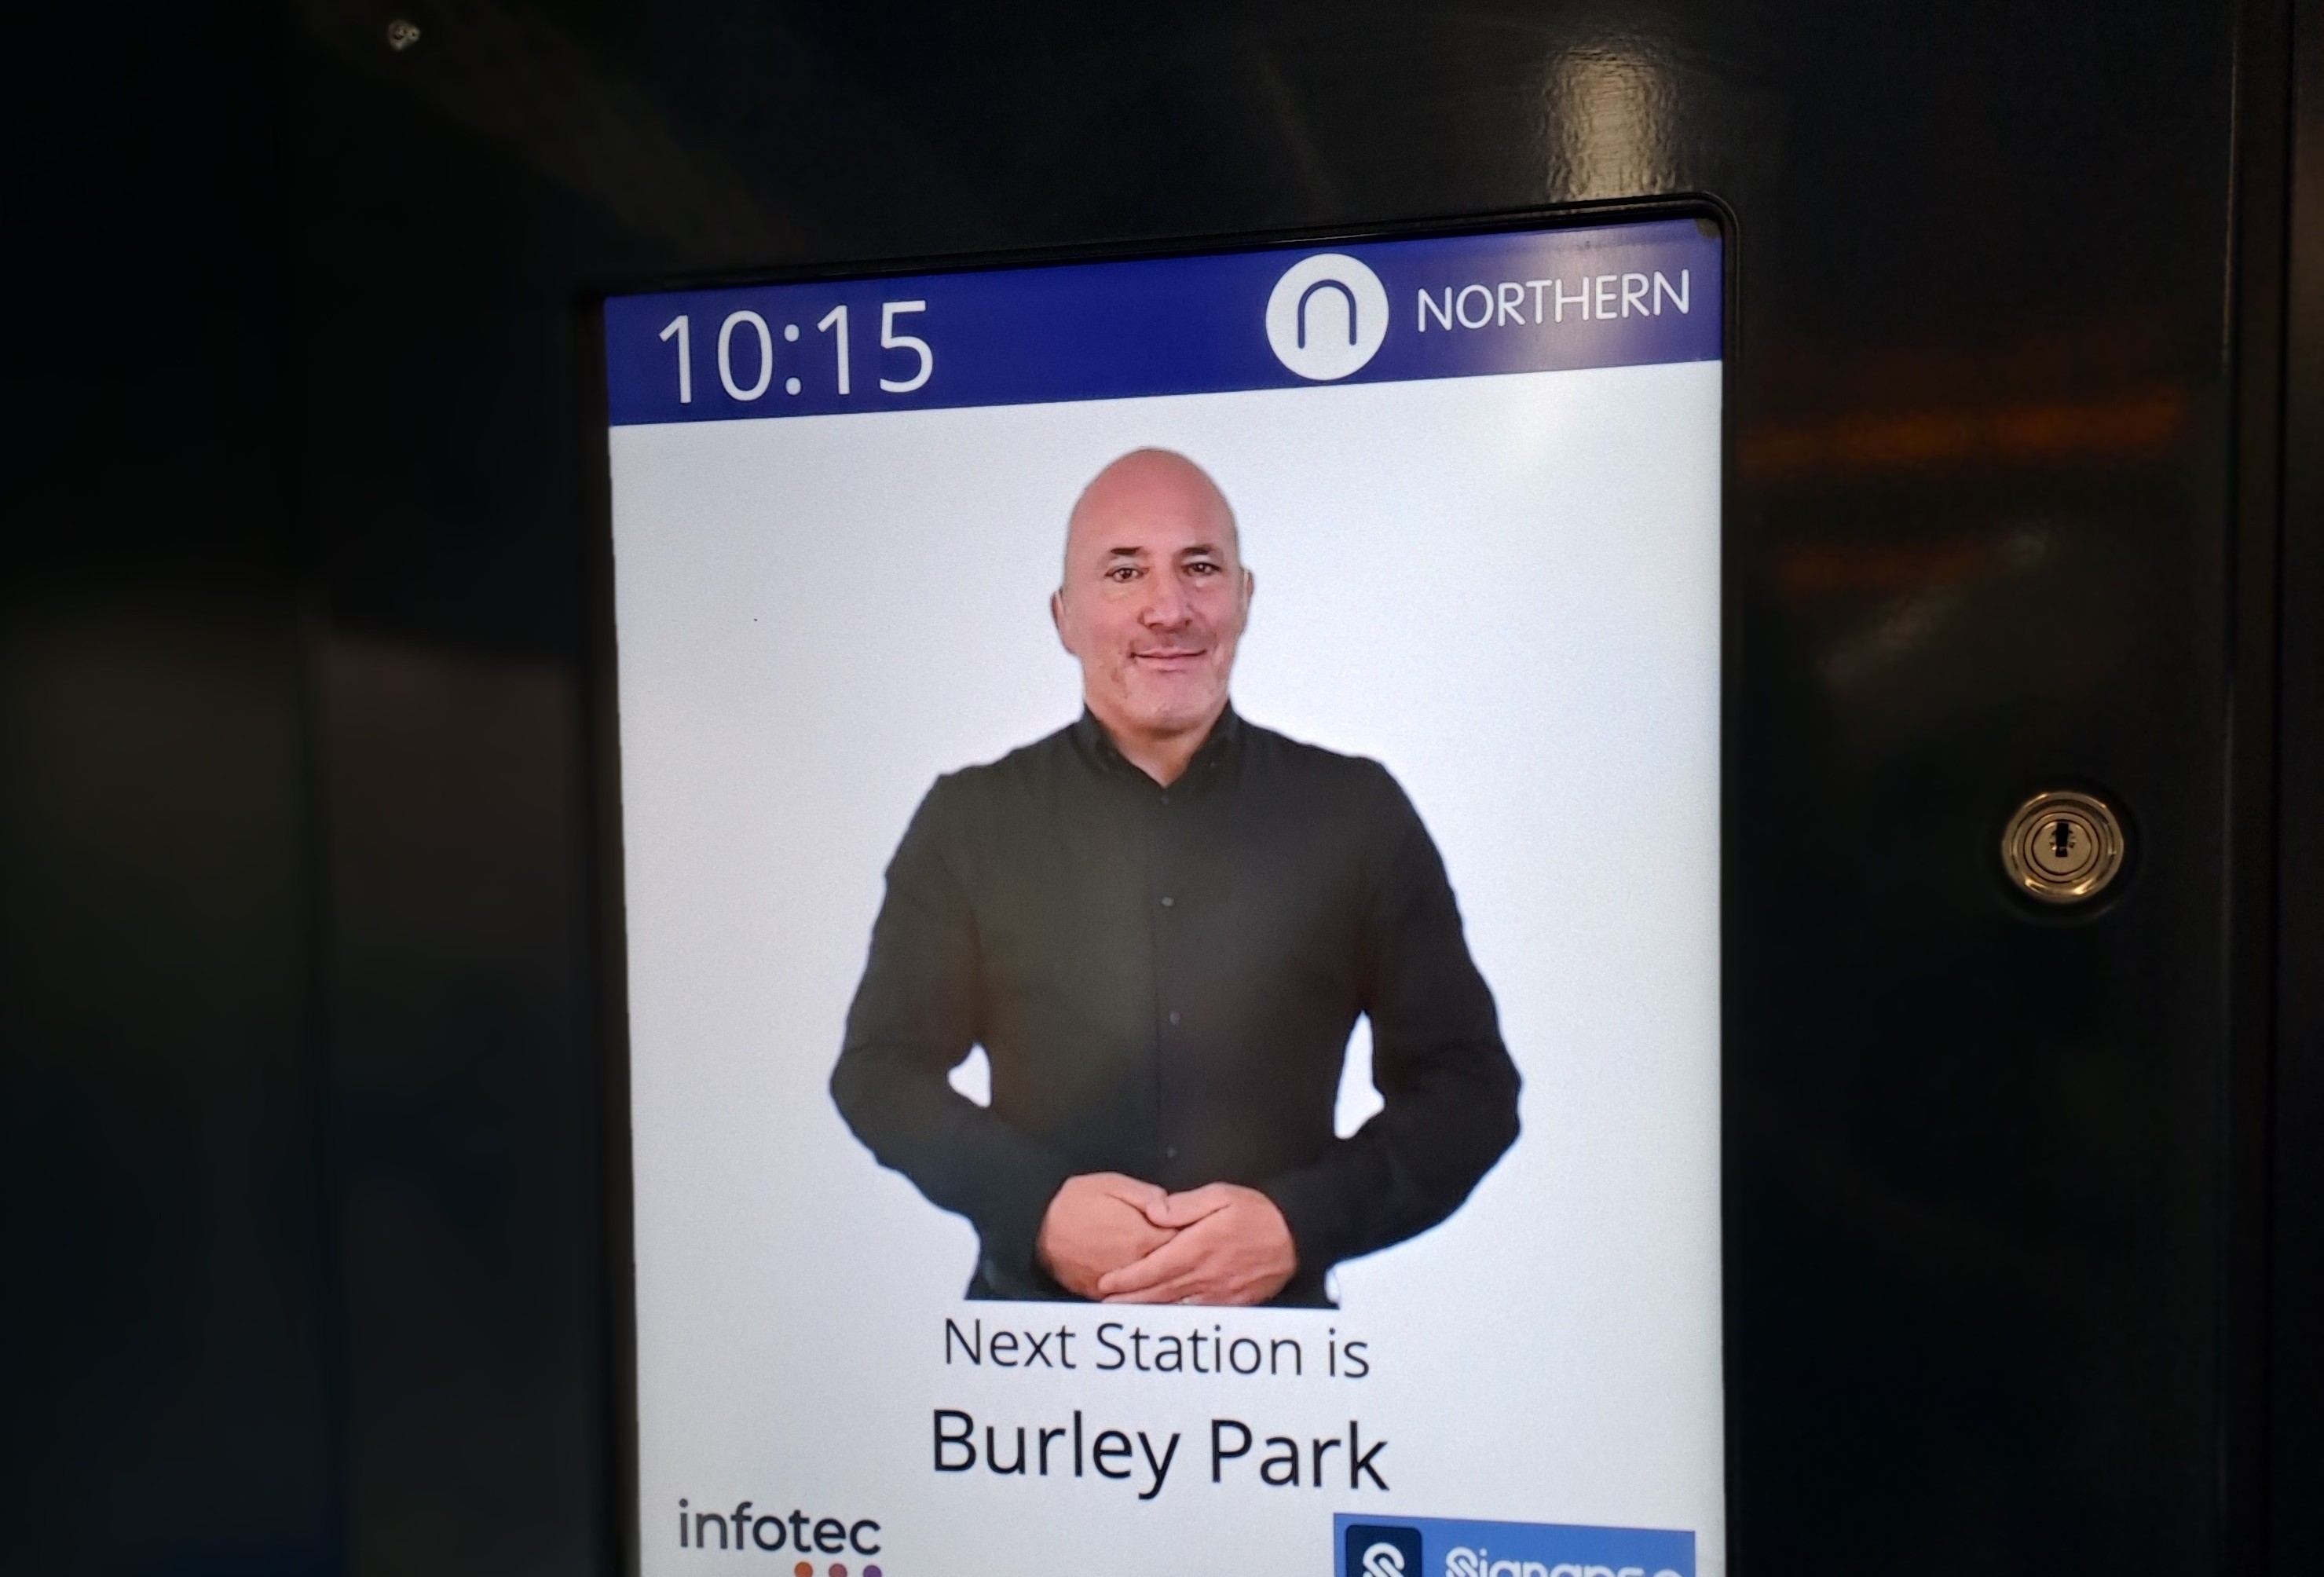 this-shows-a-bsl-station-annoucement-at-burley-park